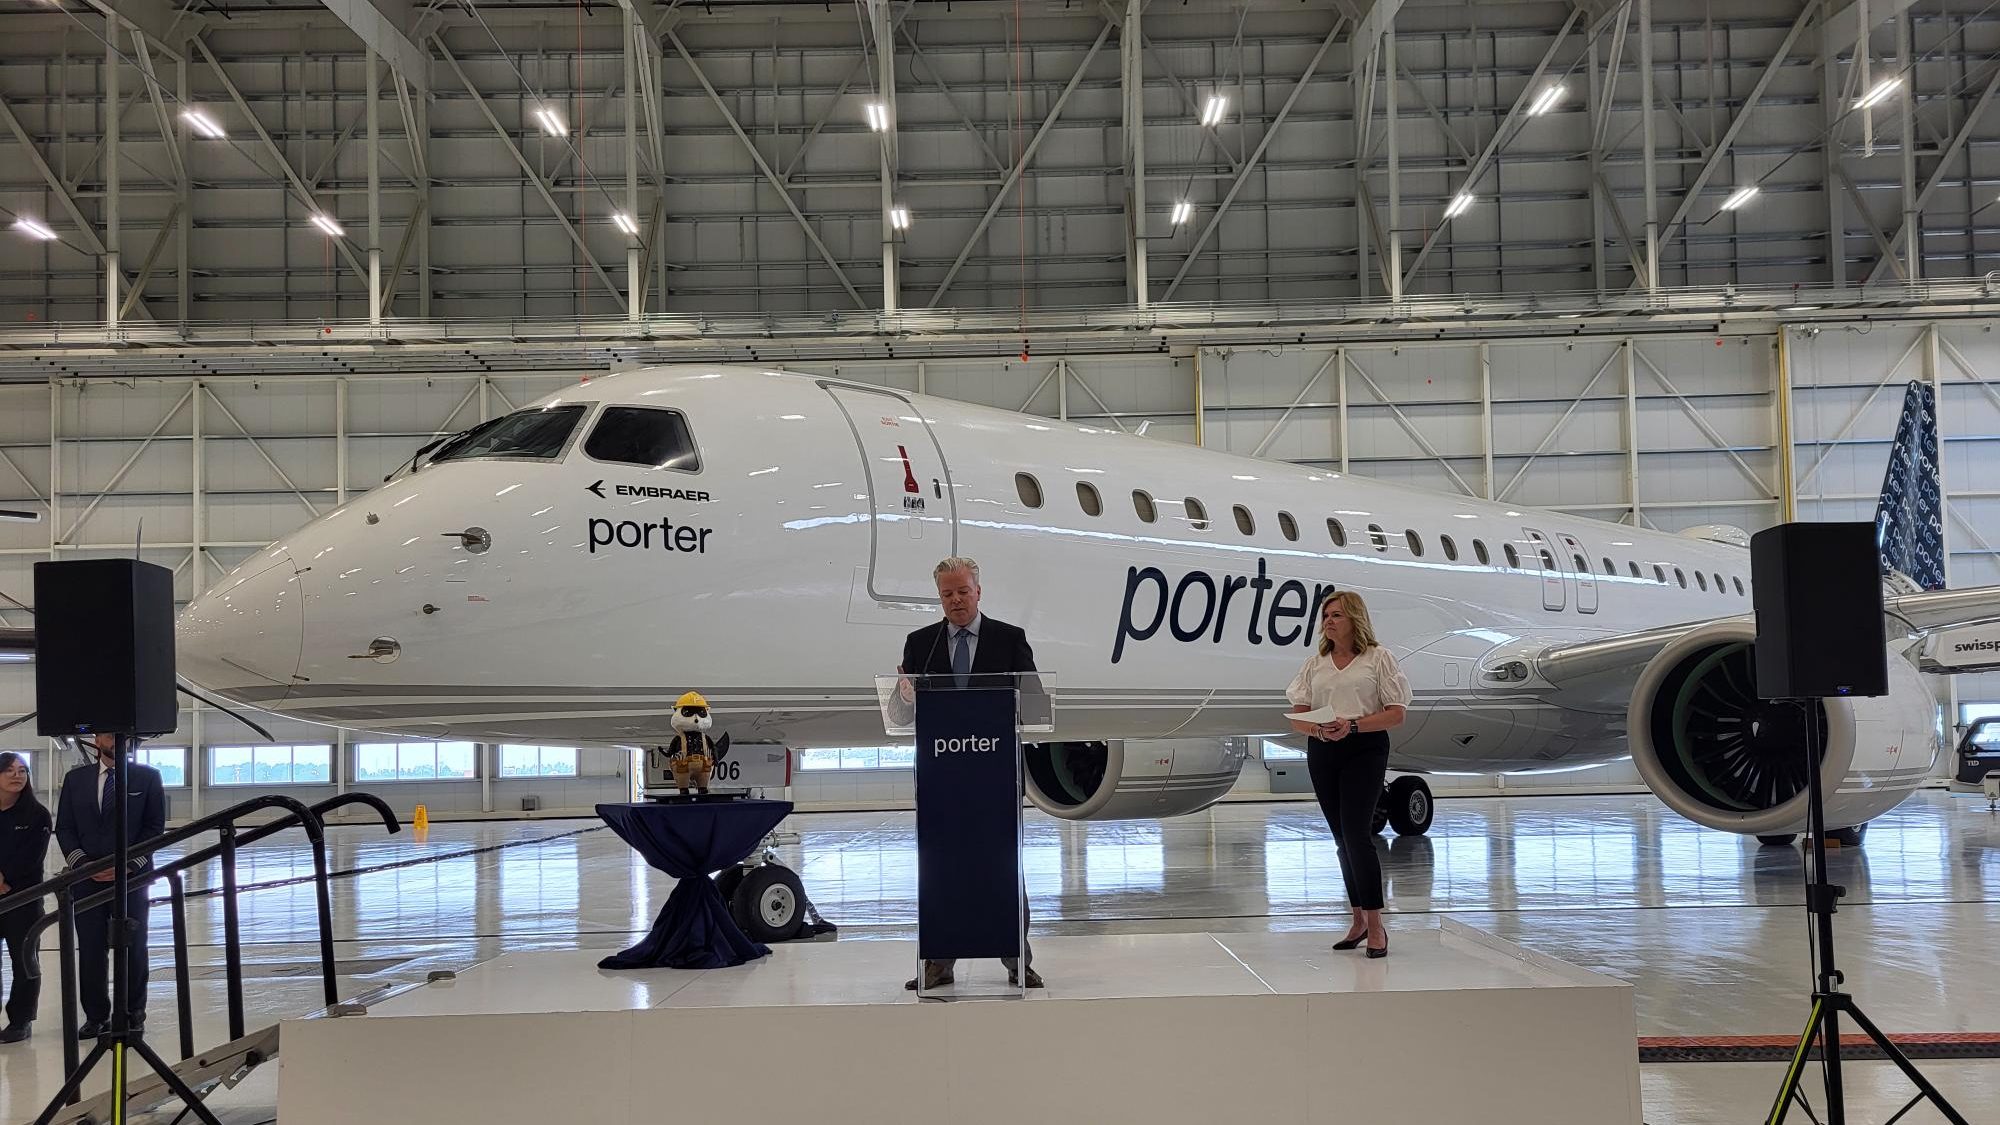 New jobs at YOW as Porter unveils new airplane hangers